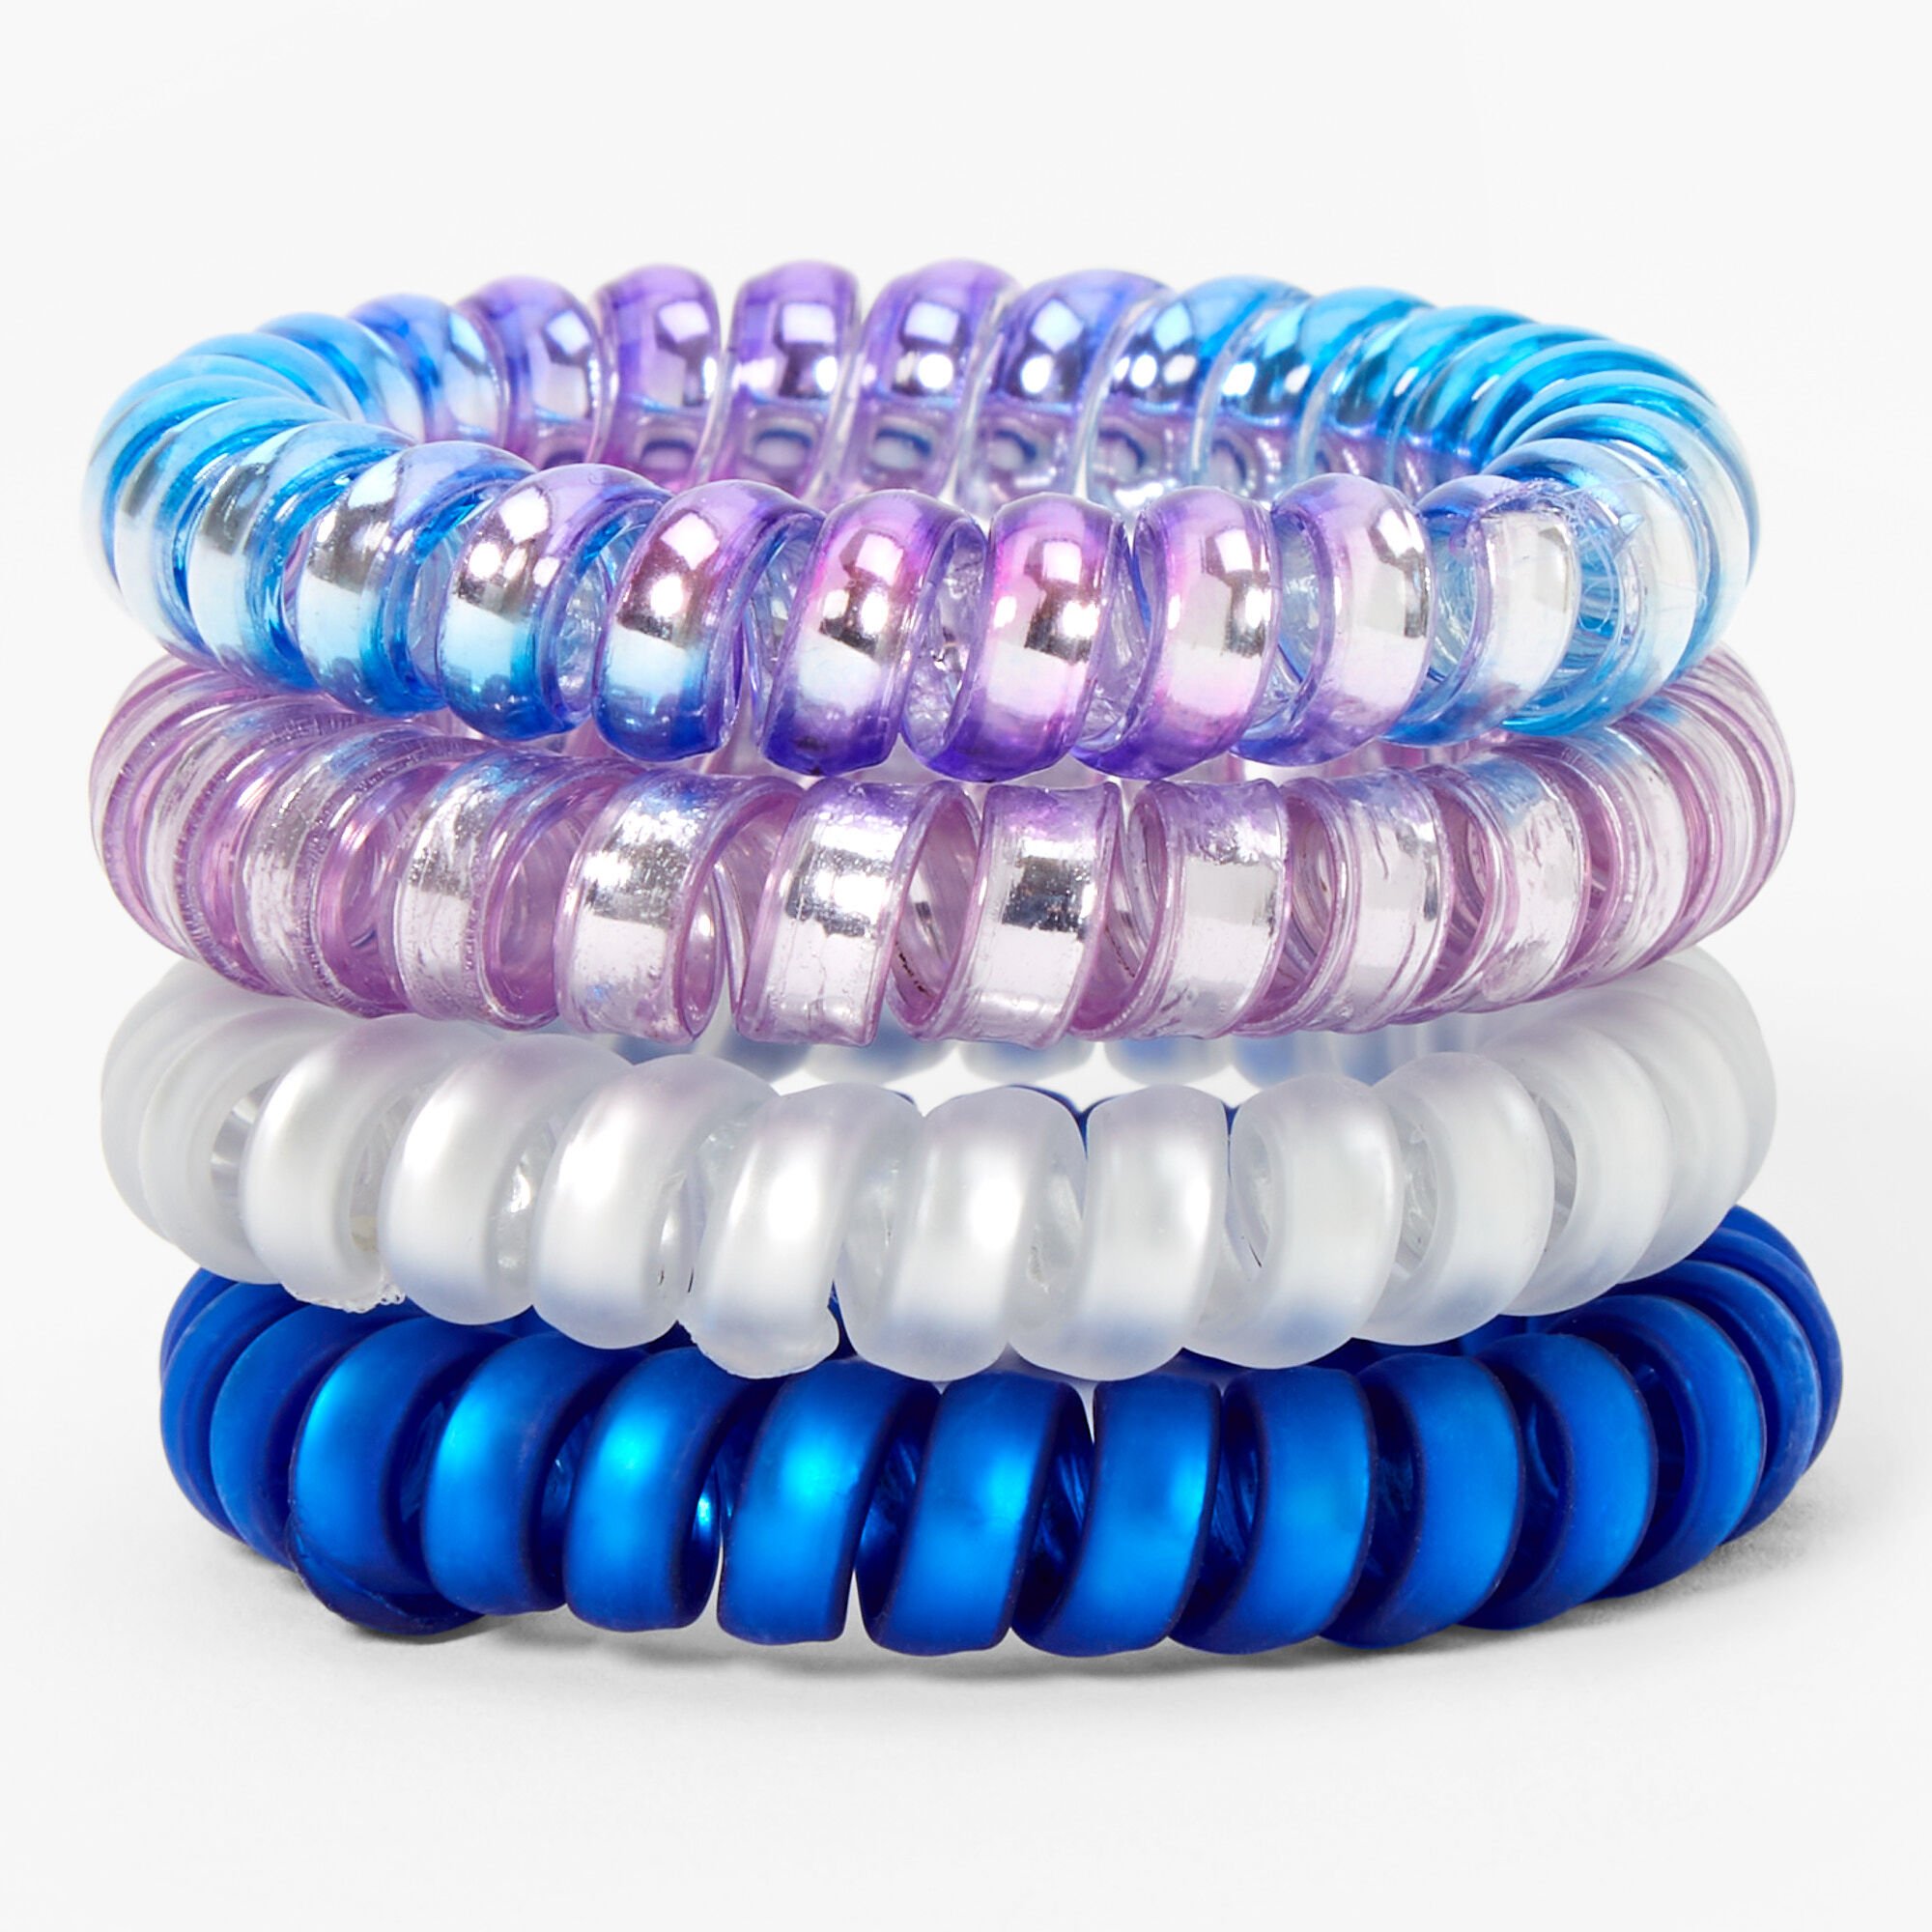 Claire's Girl's Hot Pink & Blue Coiled Hair Bobbles 